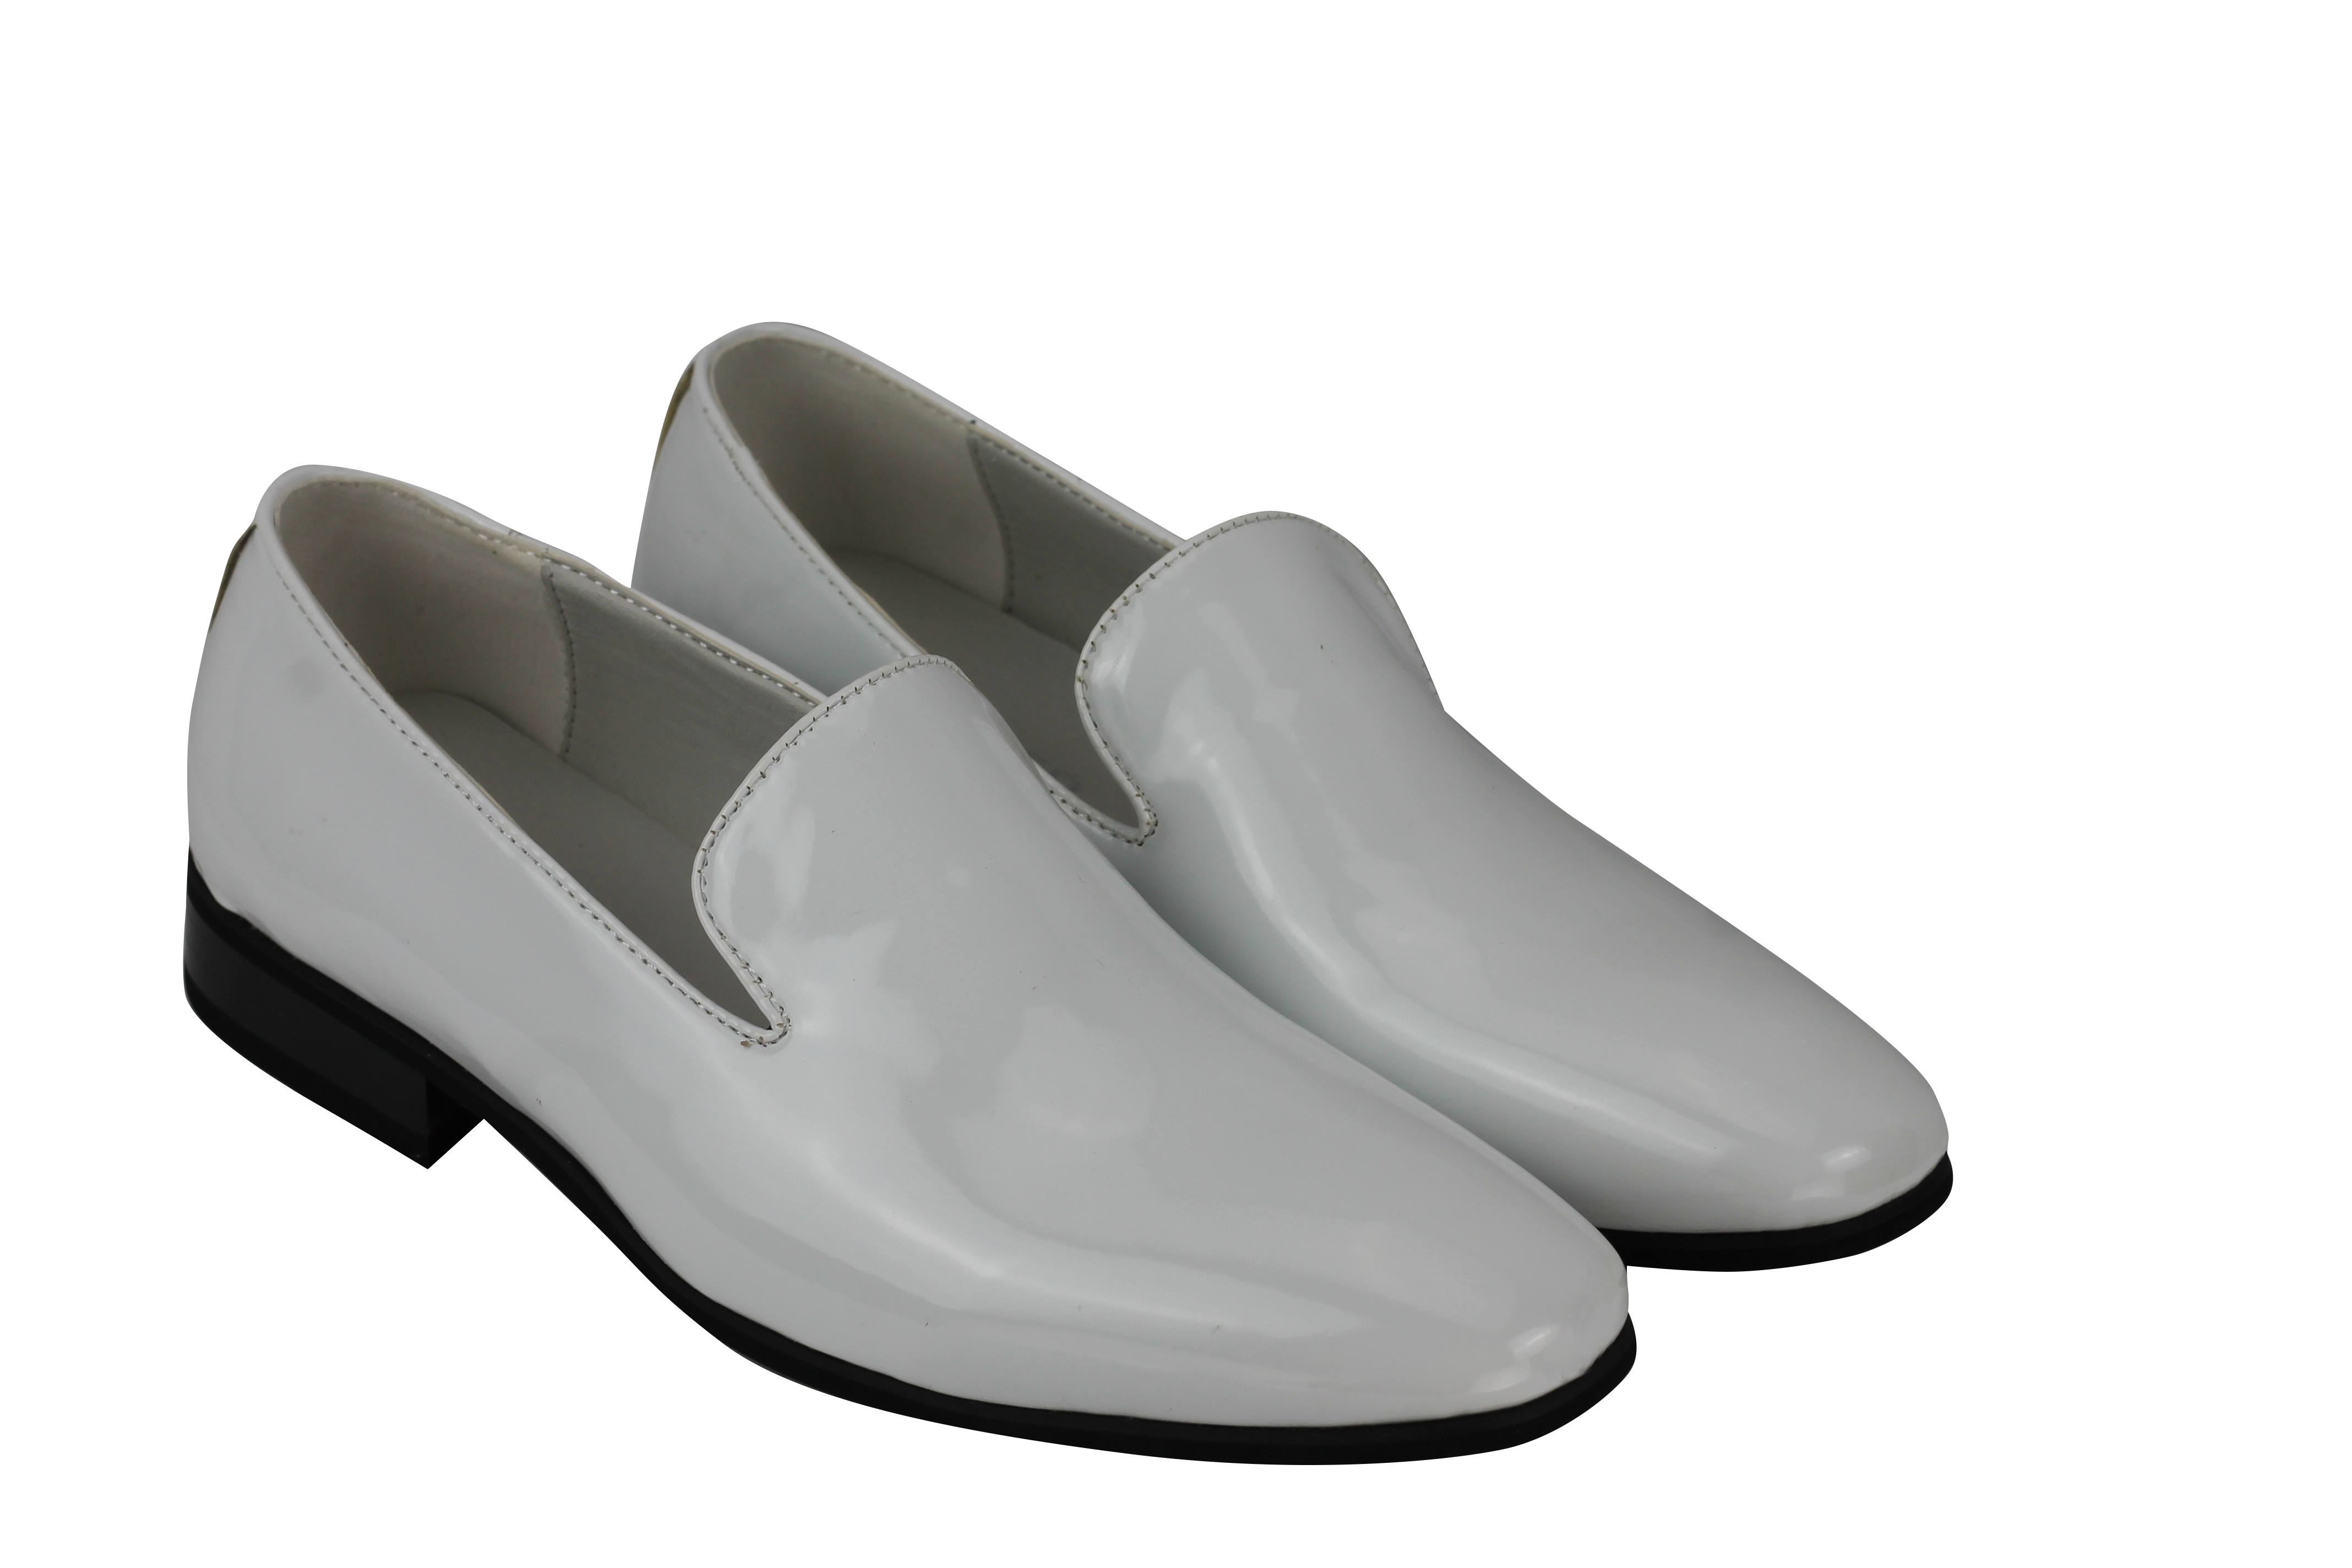 New Mens Loafers Patent Leather Smart Casual Slip on Driving Shoes UK Size 6-12 | eBay